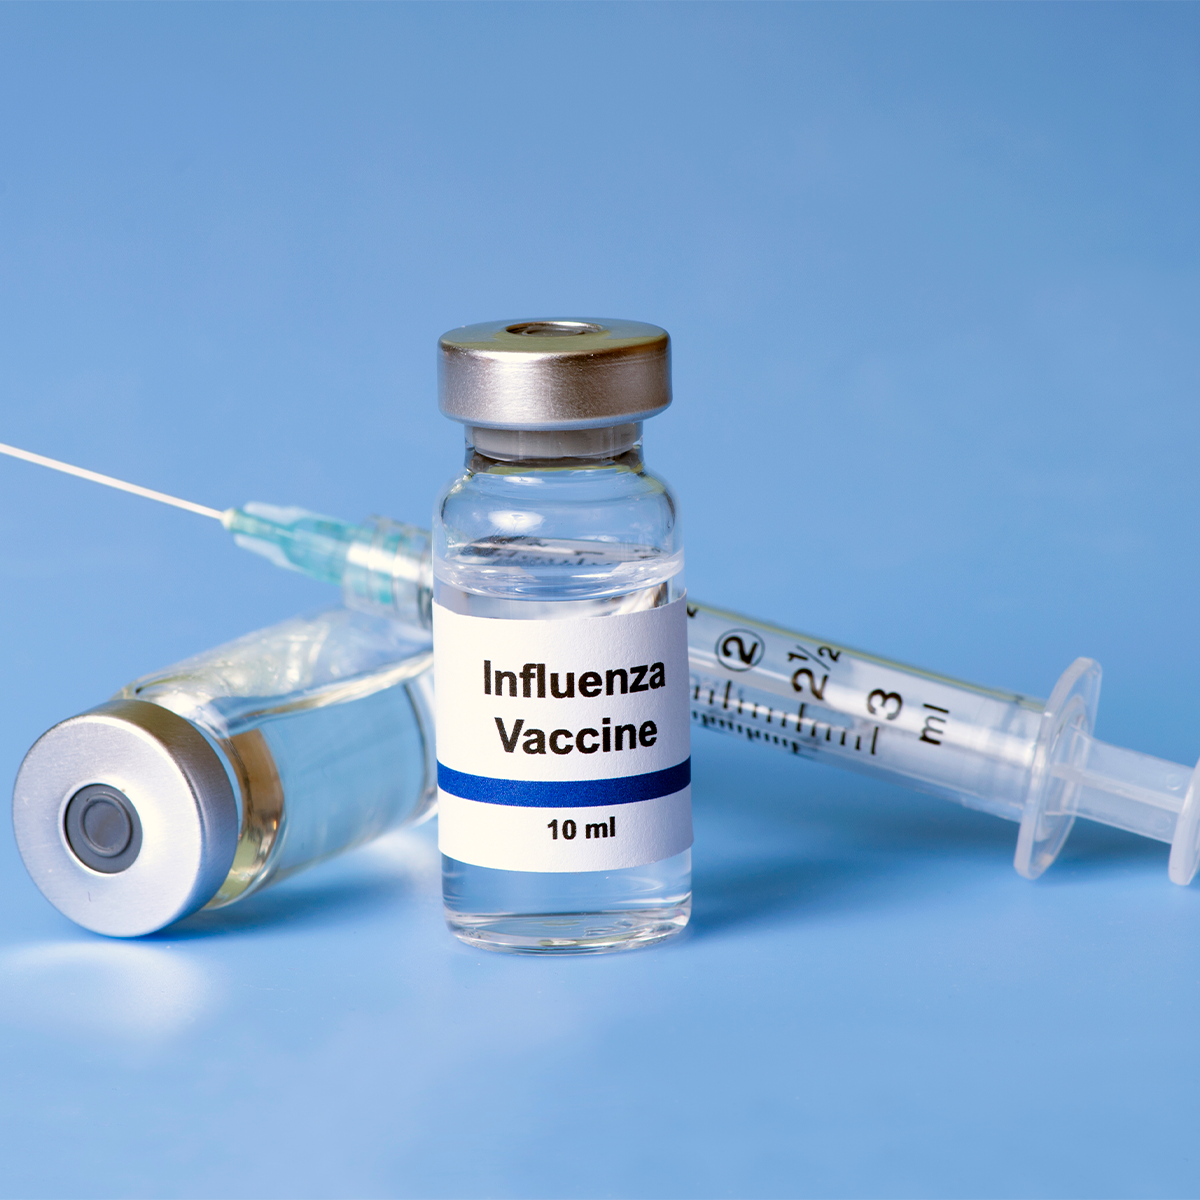 Flu season: Avoid a double viral infection by getting vaccinated